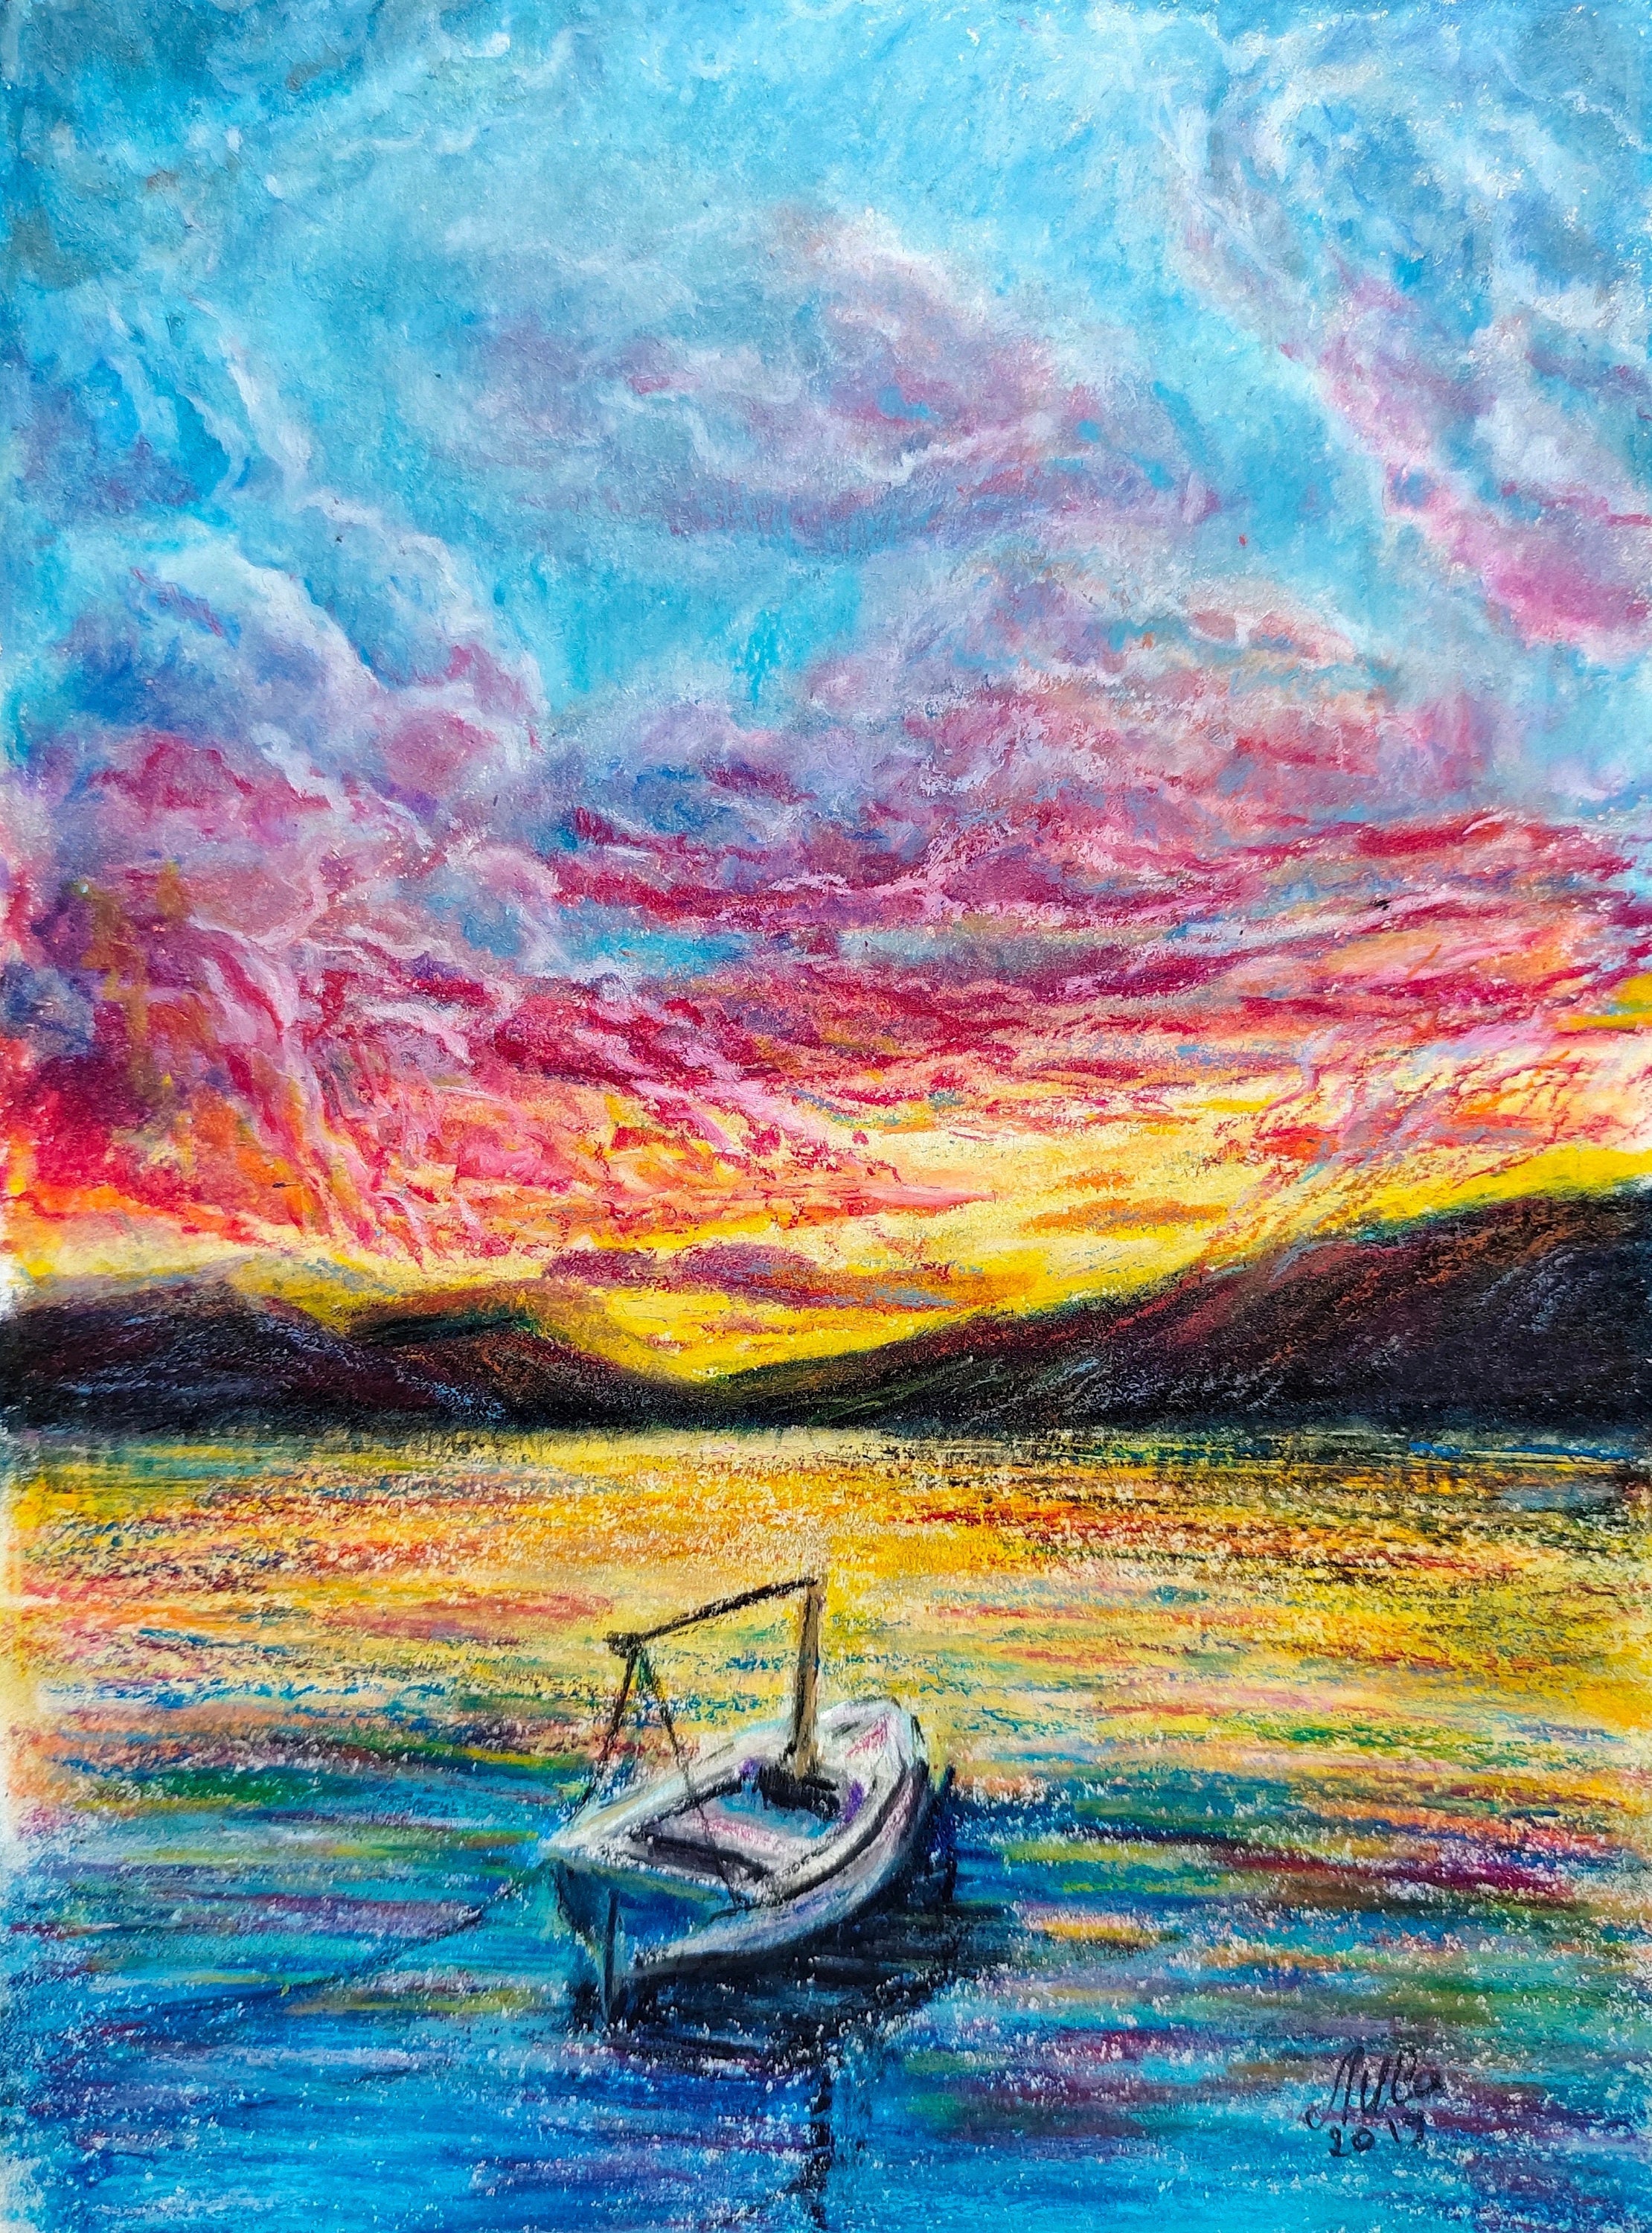 FunLearn N Draw - Beautiful Sunset and a Abandoned Boat | Oil Pastel  Colours | Easy Scenery Drawing step by step#9 #drawing #sunset #boat #draw # drawings #color #colors #colorful #colouring #beauty #beautiful #